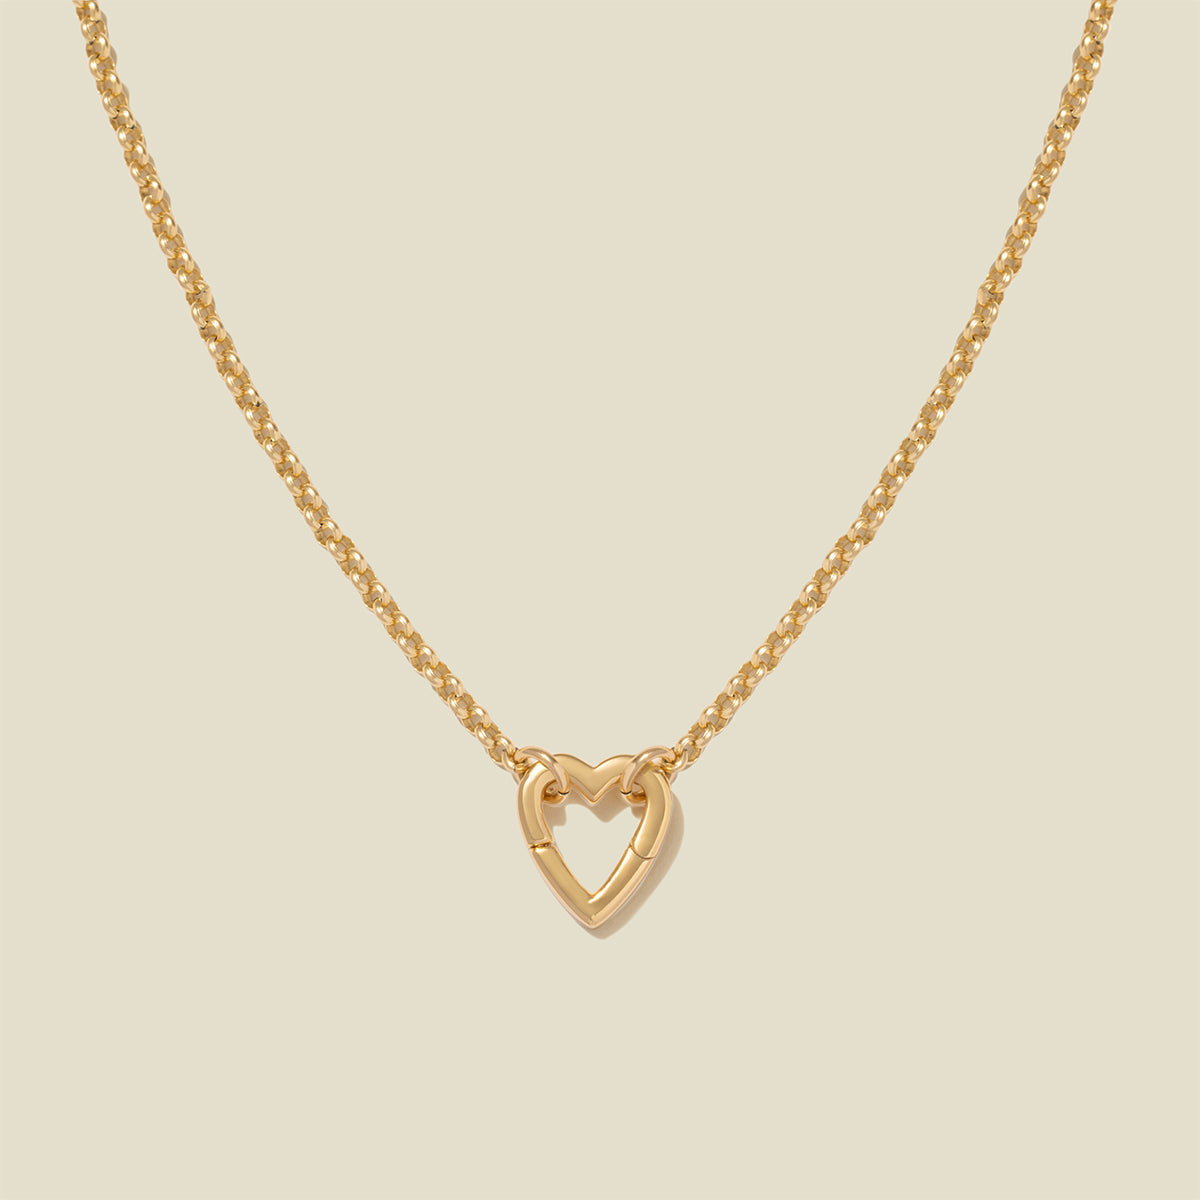 Rolo Charm Necklace Gold Filled / With Heart Link Lock Necklace